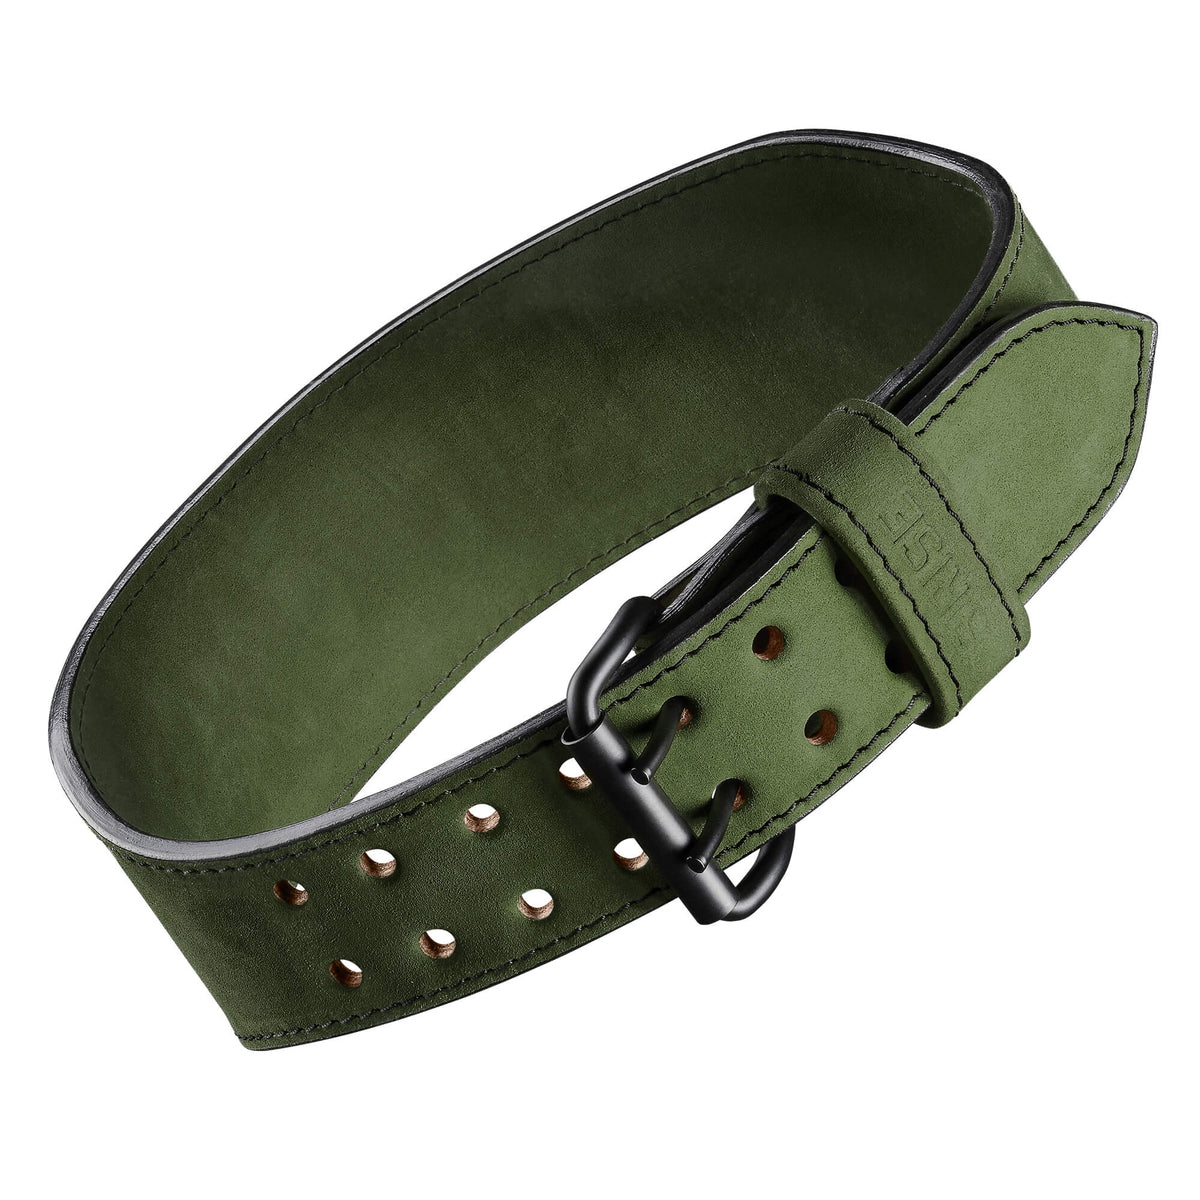 7mm Old School Leather Belt - Army Green - Rise Canada